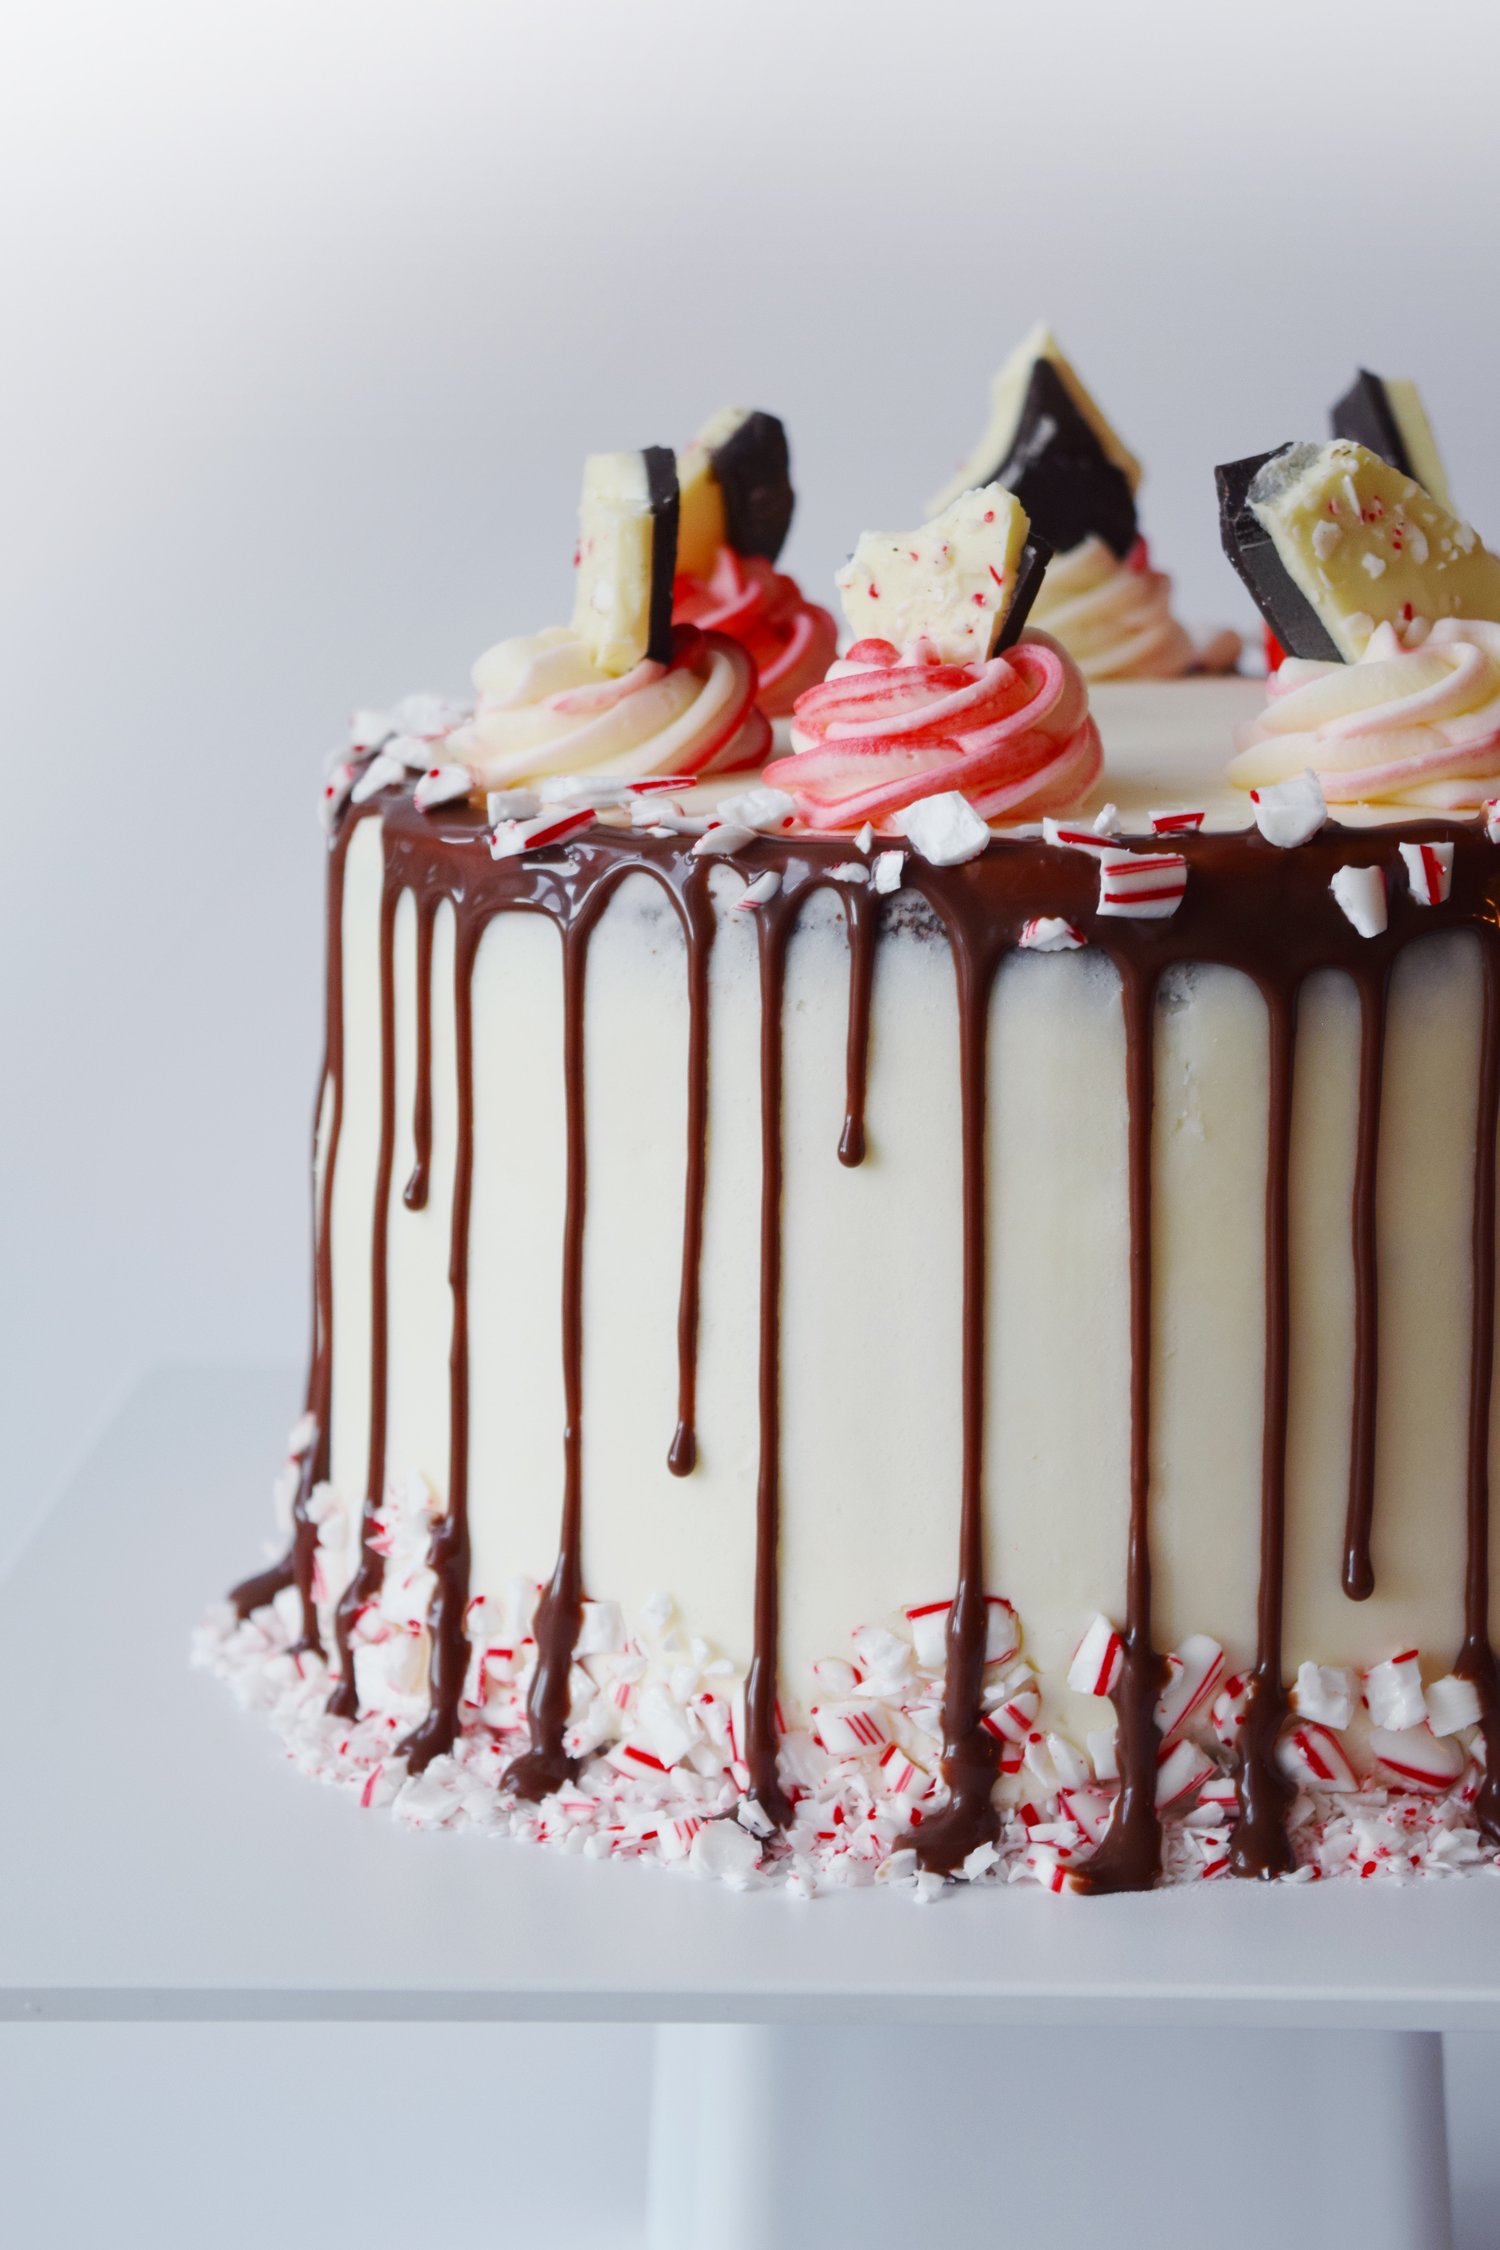 Peppermint Bark Chocolate Cake with Peppermint Buttercream Frosting